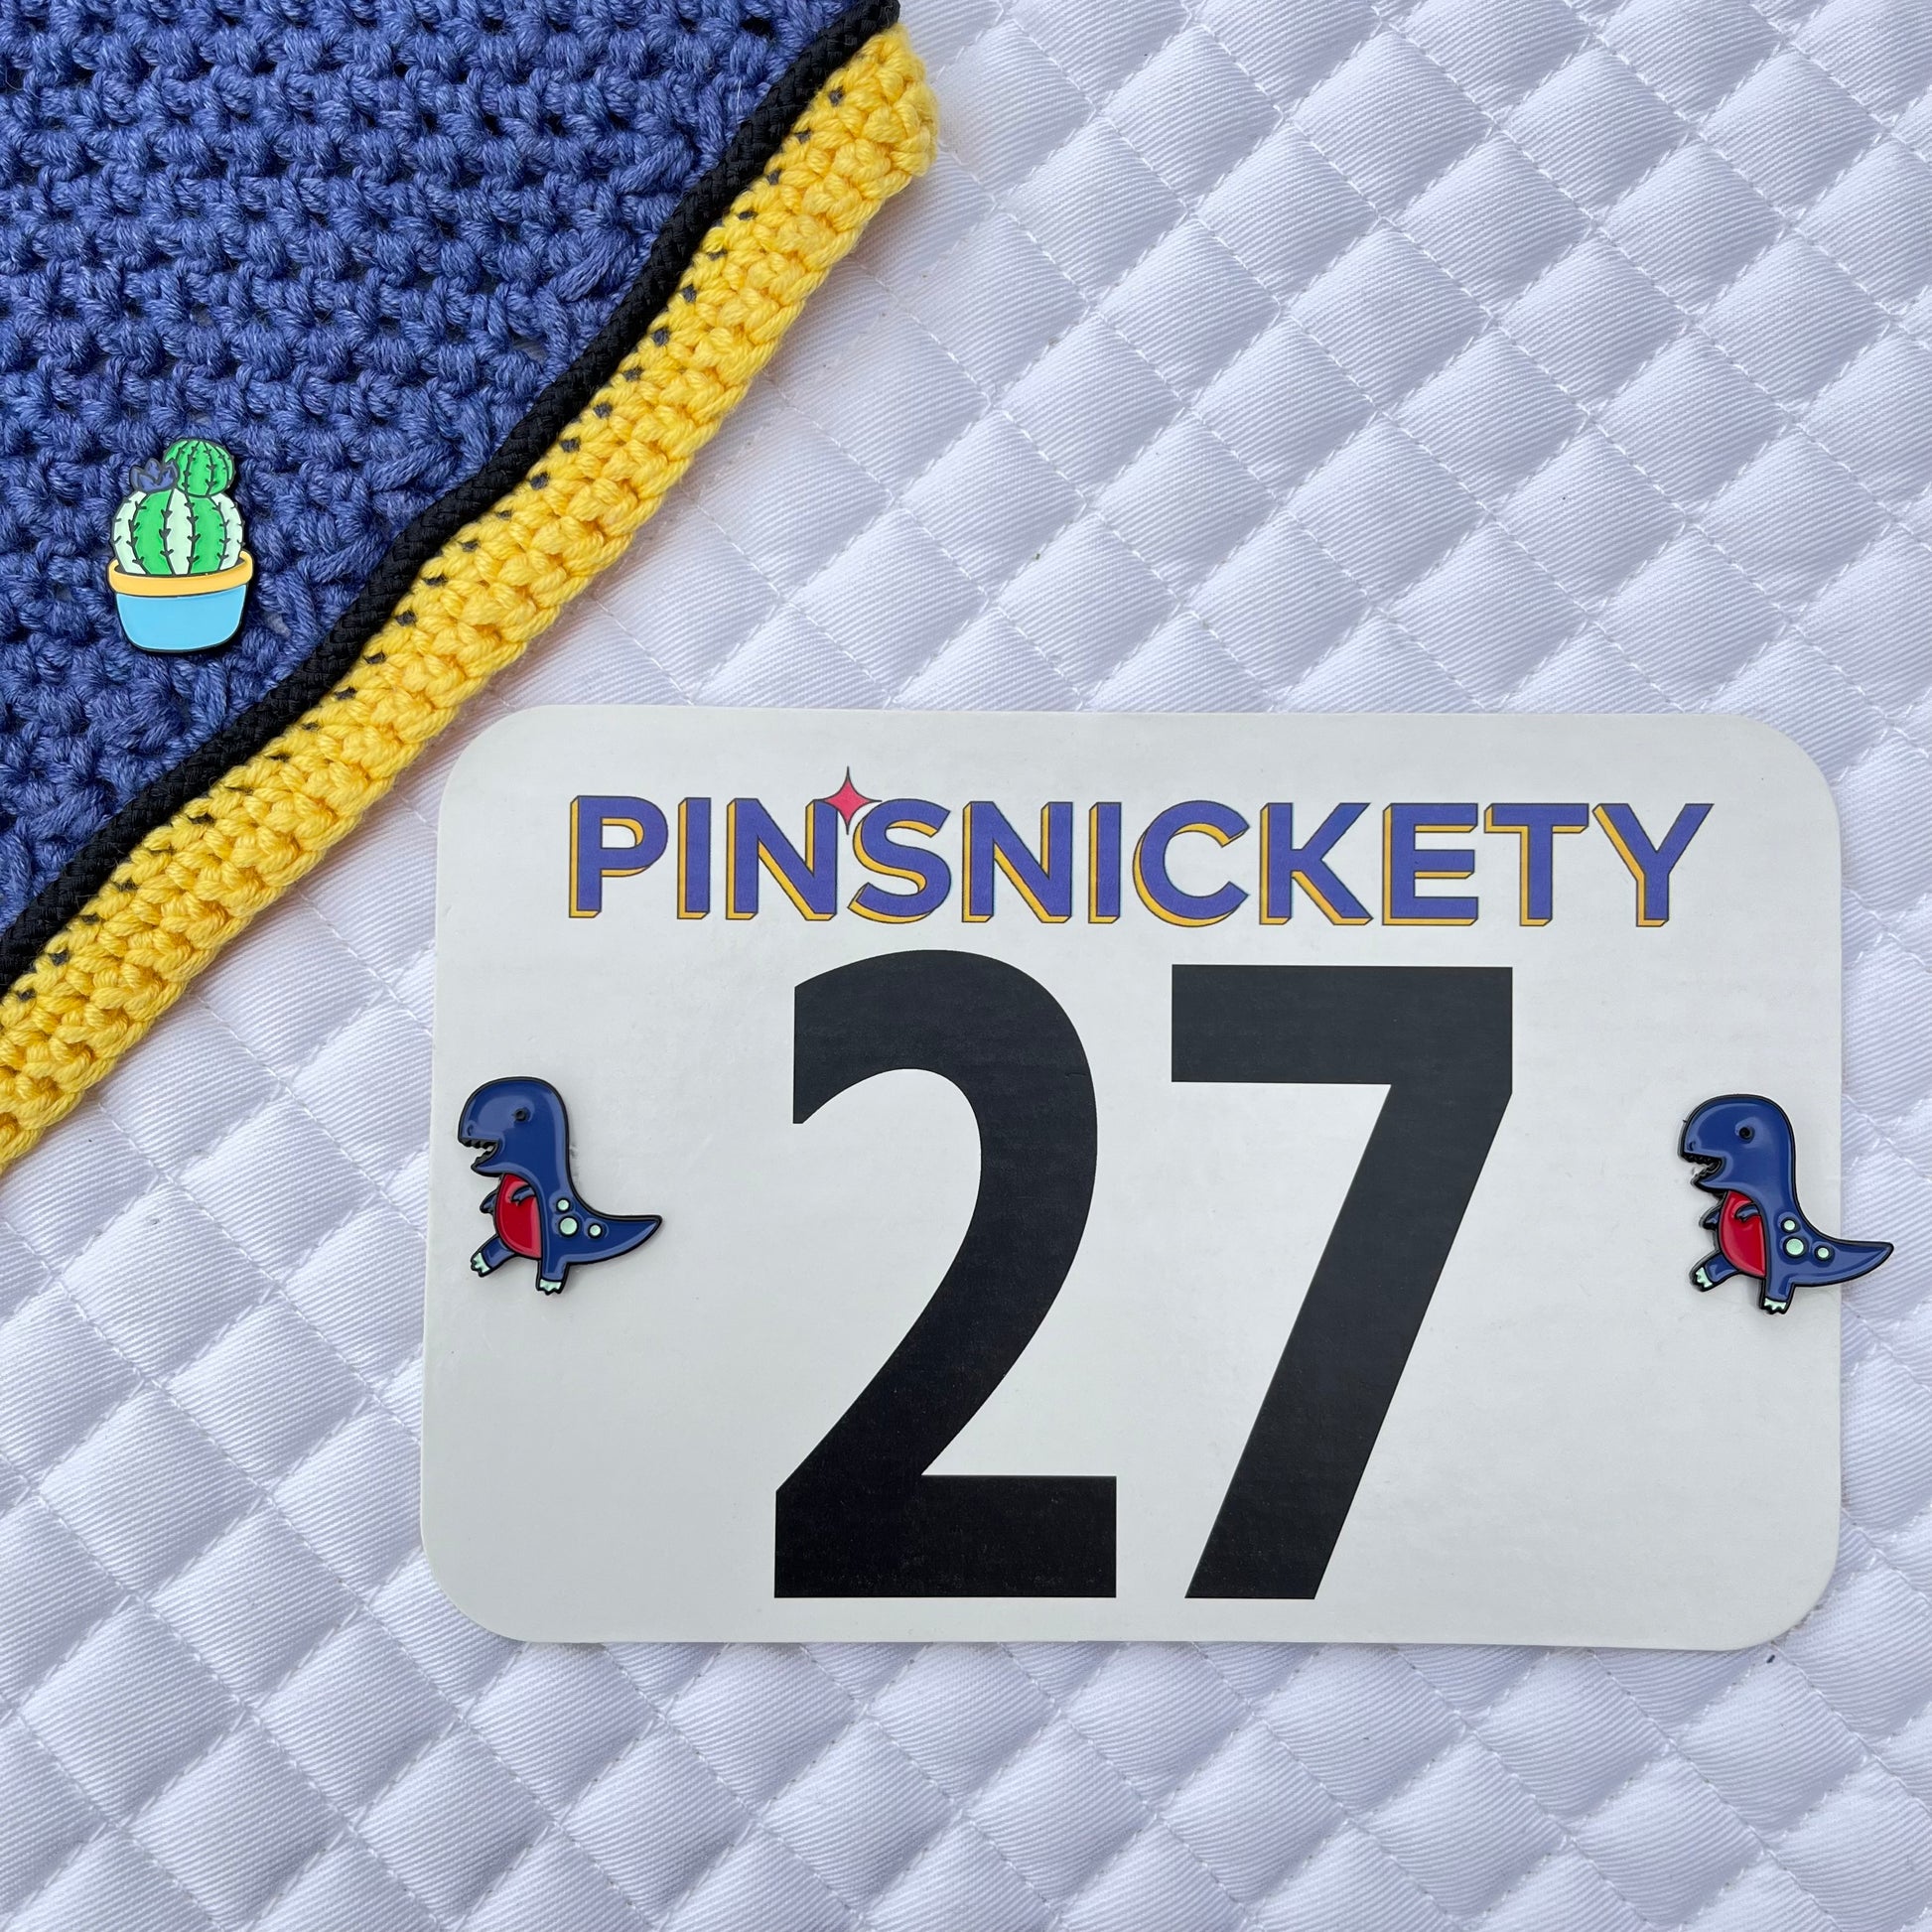 Pinsnickety cactus horse show number pin on a fly bonnet and t-rex horse show number pins on a saddle pad